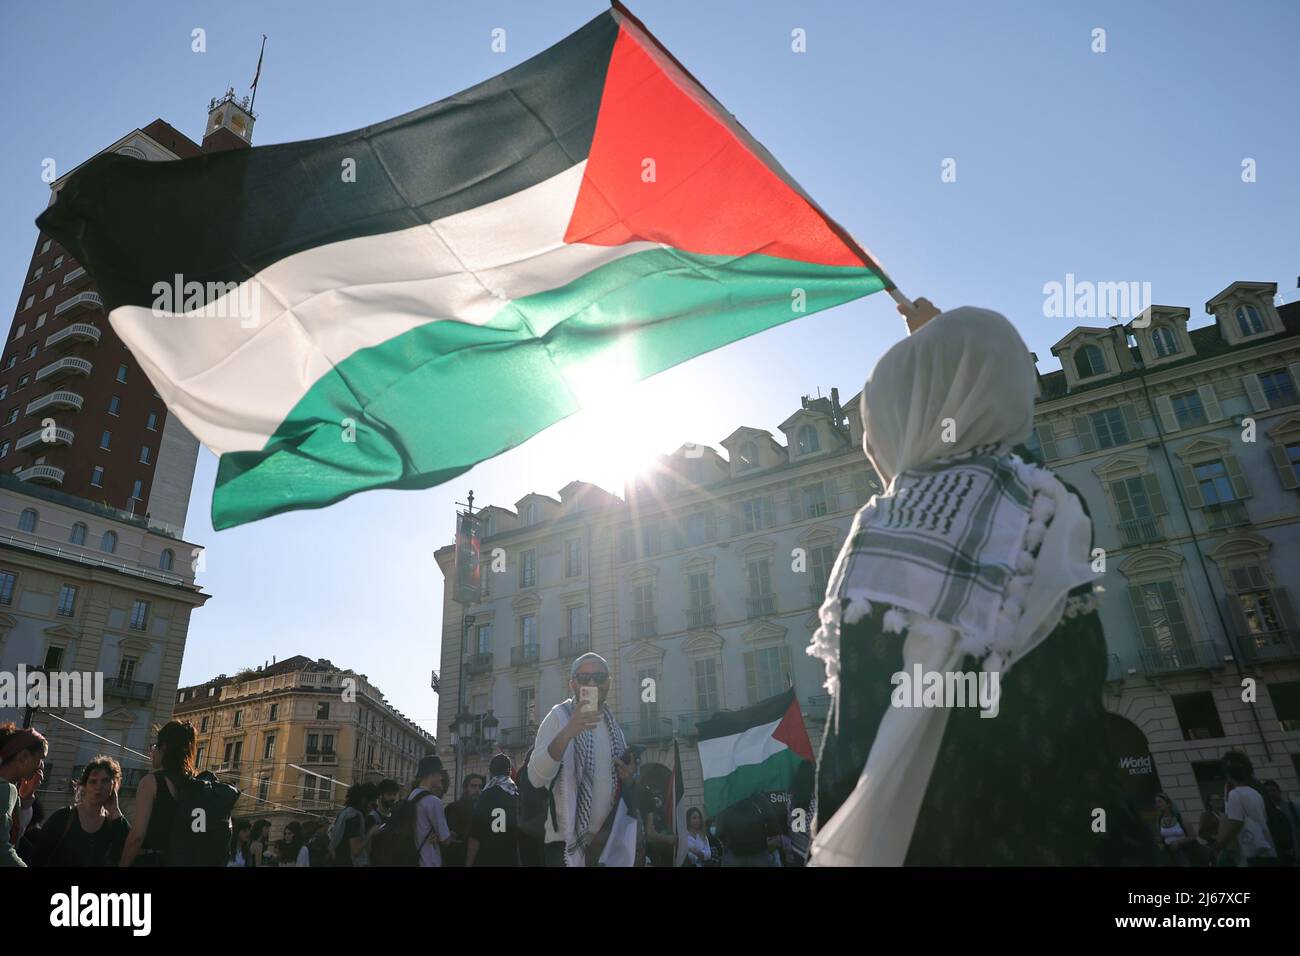 Turin, Italy. 28th April, 2022. People protest against the raids of Israeli forces in West Bank and restrictions on access to holy sites in Jerusalem during the Ramadan time. Credit: MLBARIONA/Alamy Live News Stock Photo